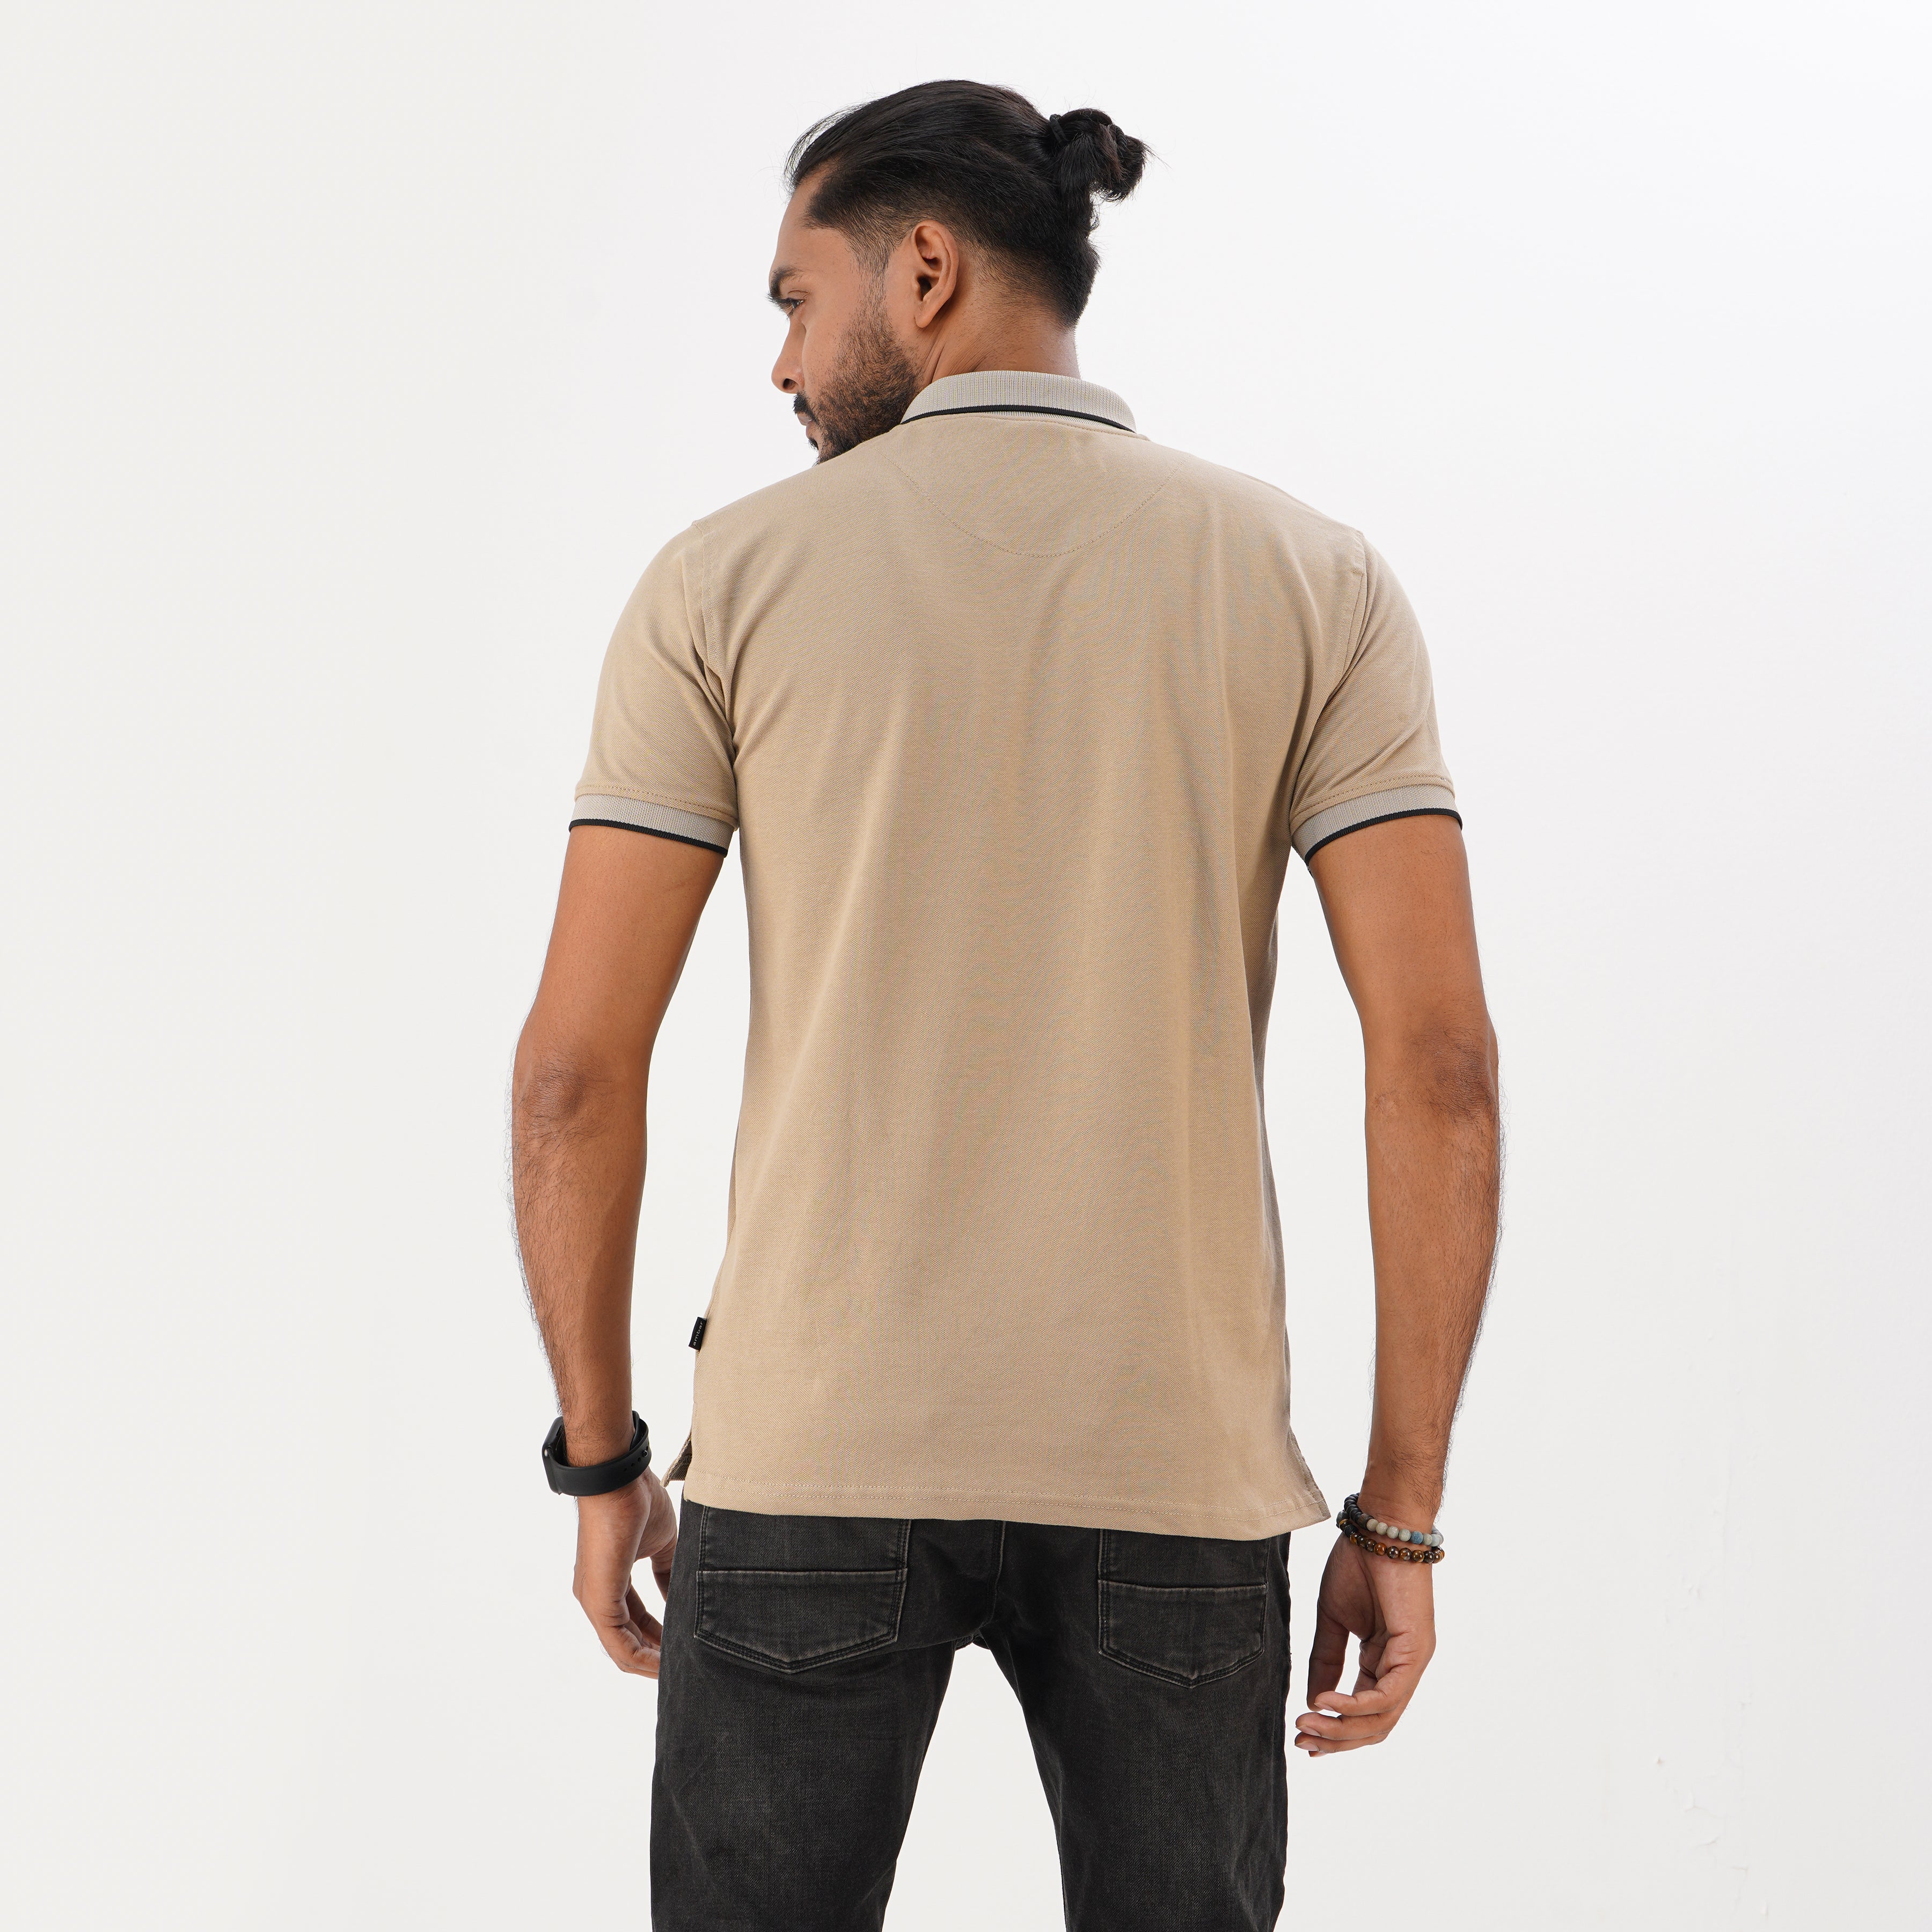 Polo Shirt for Men | Solid Biscuit Polo